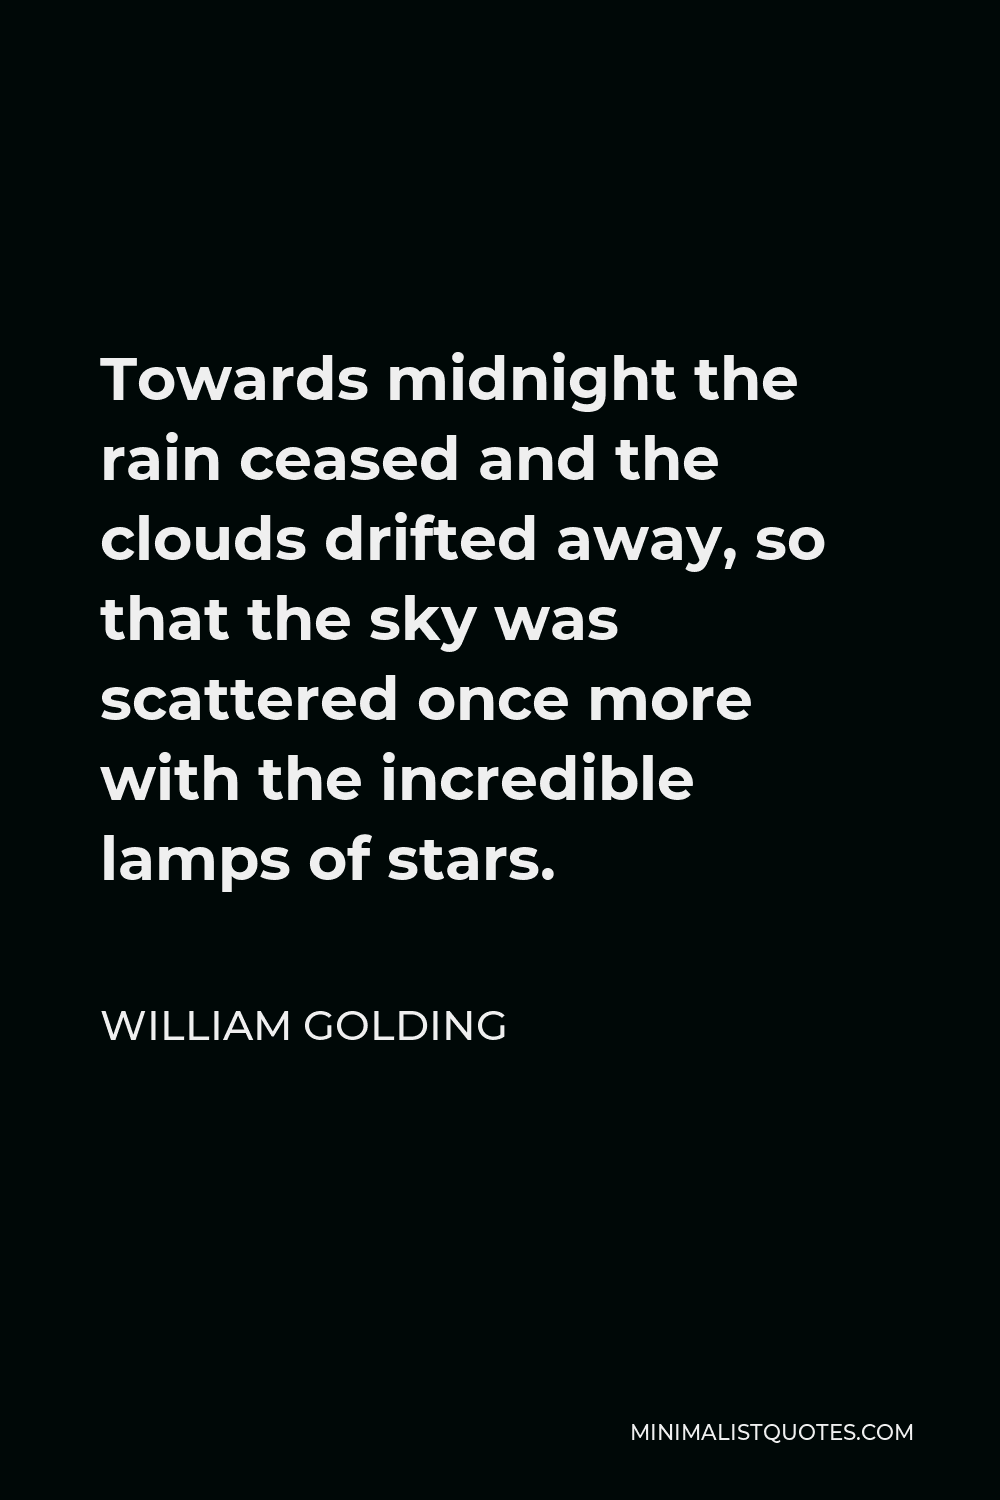 William Golding Quote - Towards midnight the rain ceased and the clouds drifted away, so that the sky was scattered once more with the incredible lamps of stars.